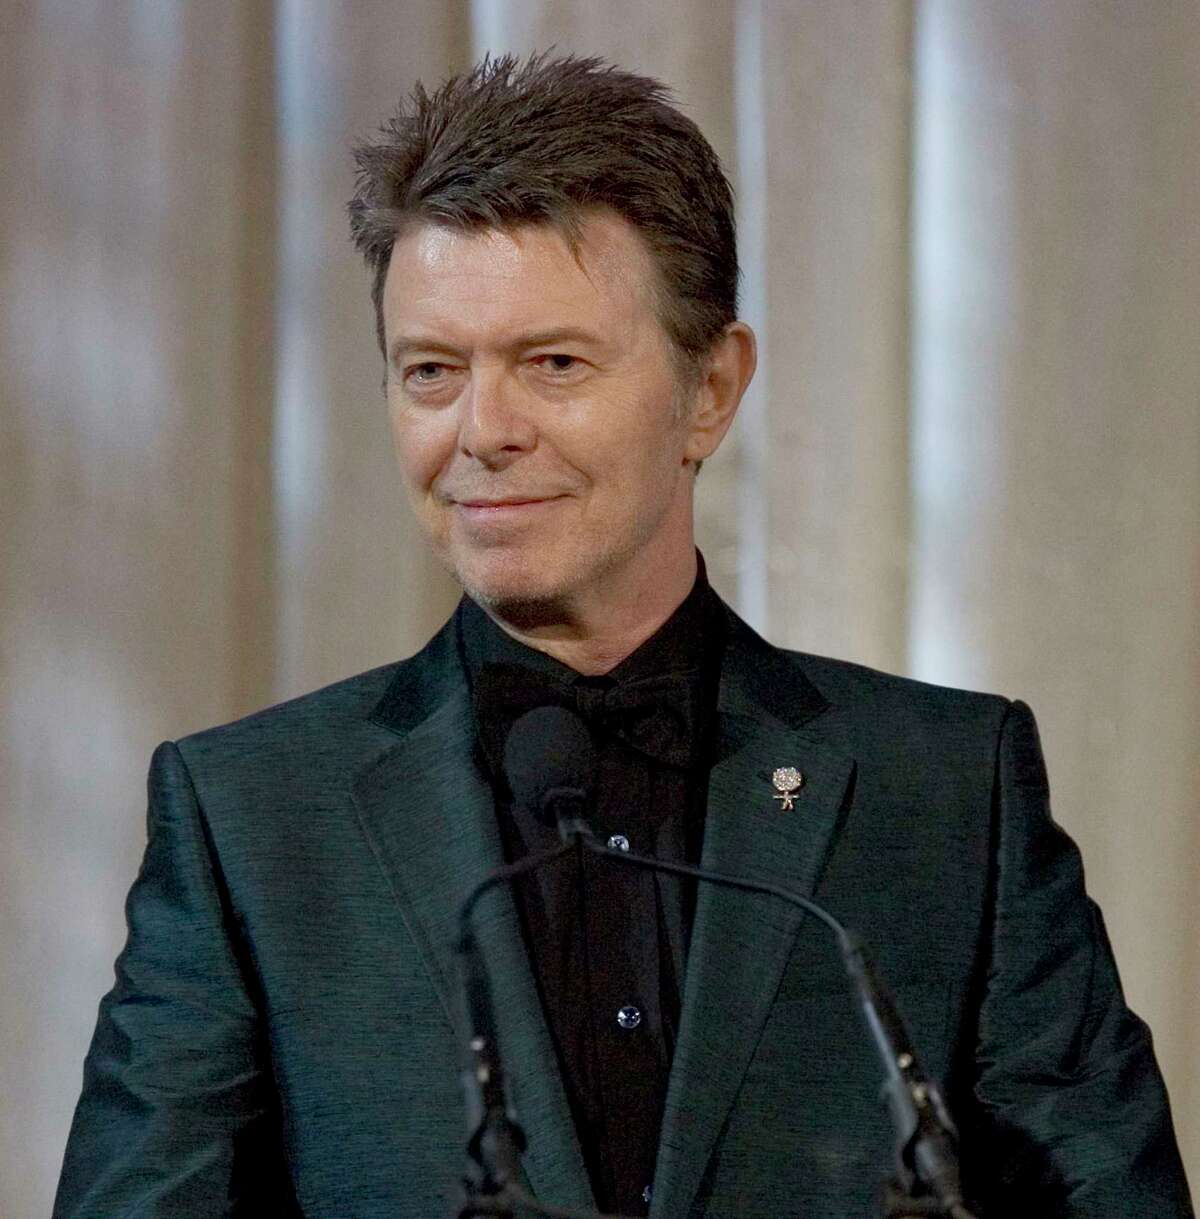 In this June 5, 2007, file photo, David Bowie attends an awards show in New York. Bowie wanted his ashes to be scattered in Bali, “in accordance with the Buddhist rituals” and left most of his estate to his widow, the supermodel Iman and his two children, according to his will filed Friday, Jan. 30, 2016.